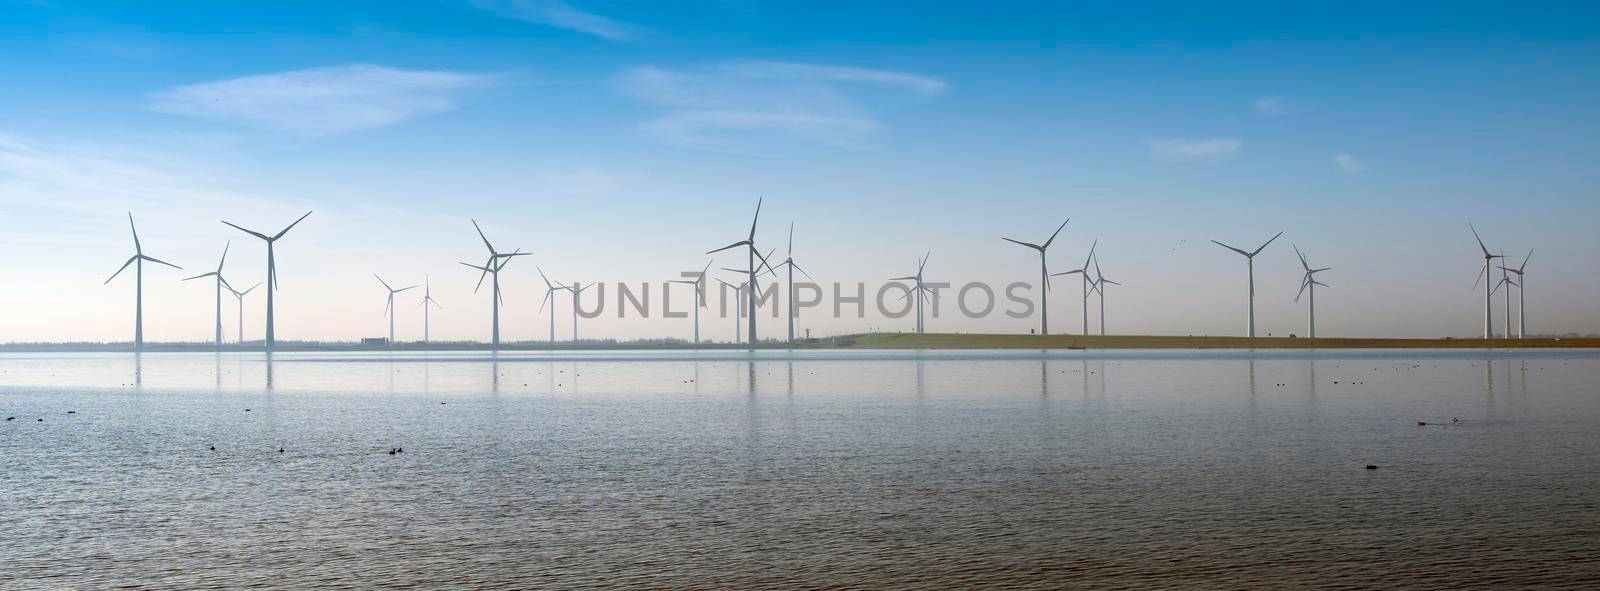 wind turbines under blue sky on philipsdam in dutch province of Zeeland in the netherlands in the netherlands